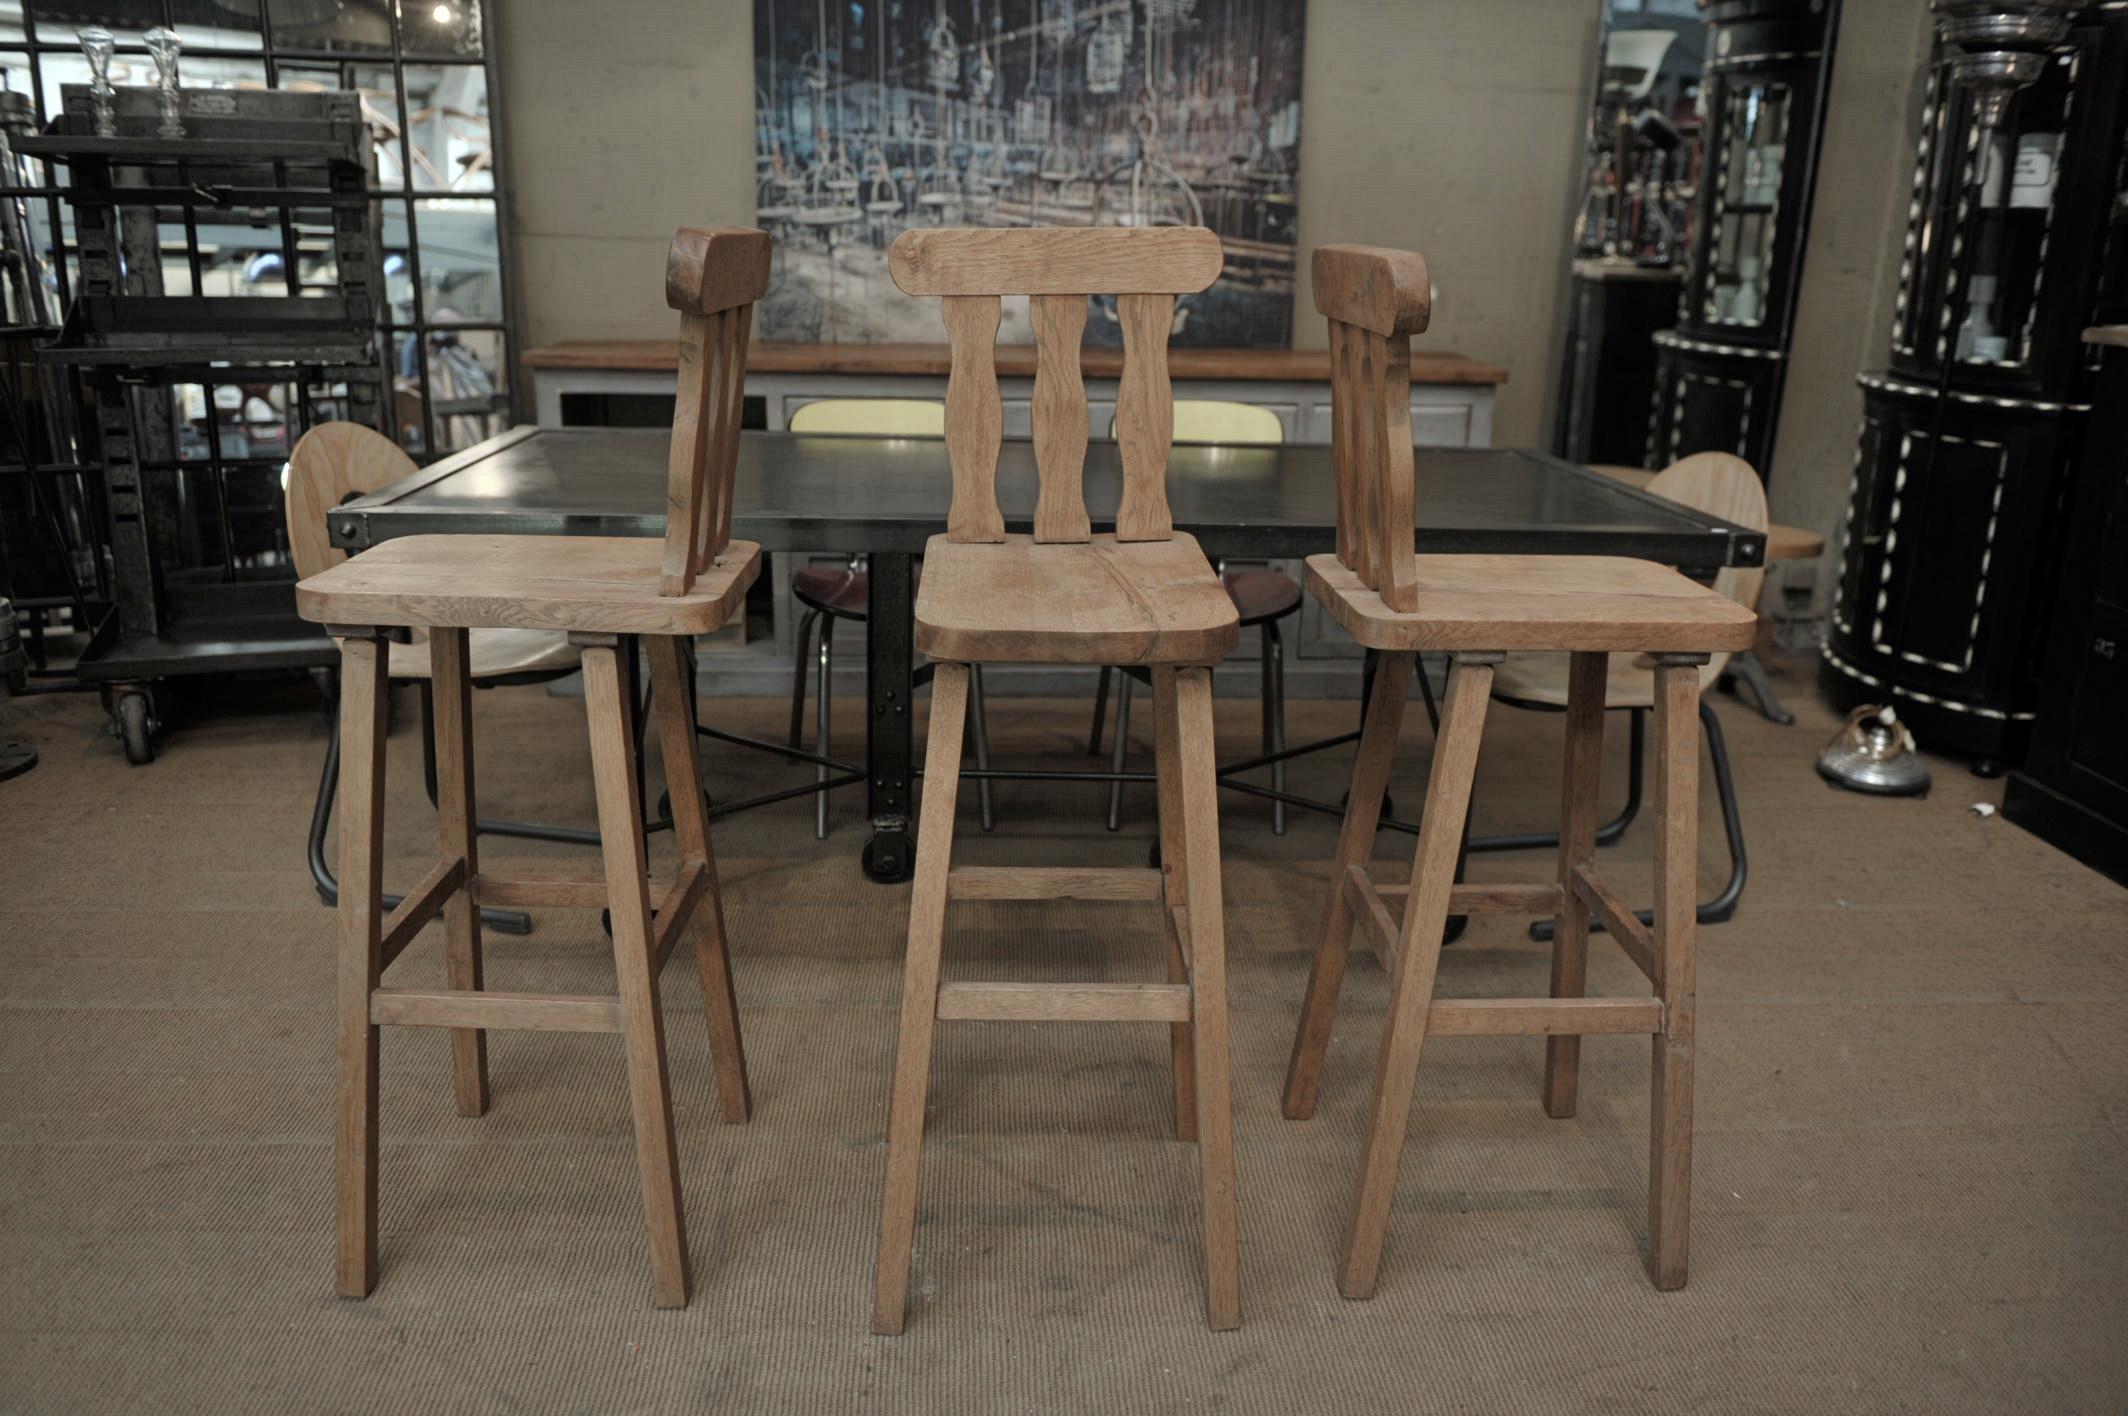 3 solid oak high bar stools by French designers Guillerme & Chambron for Votre maison manufacturer circa 1960s price for one.